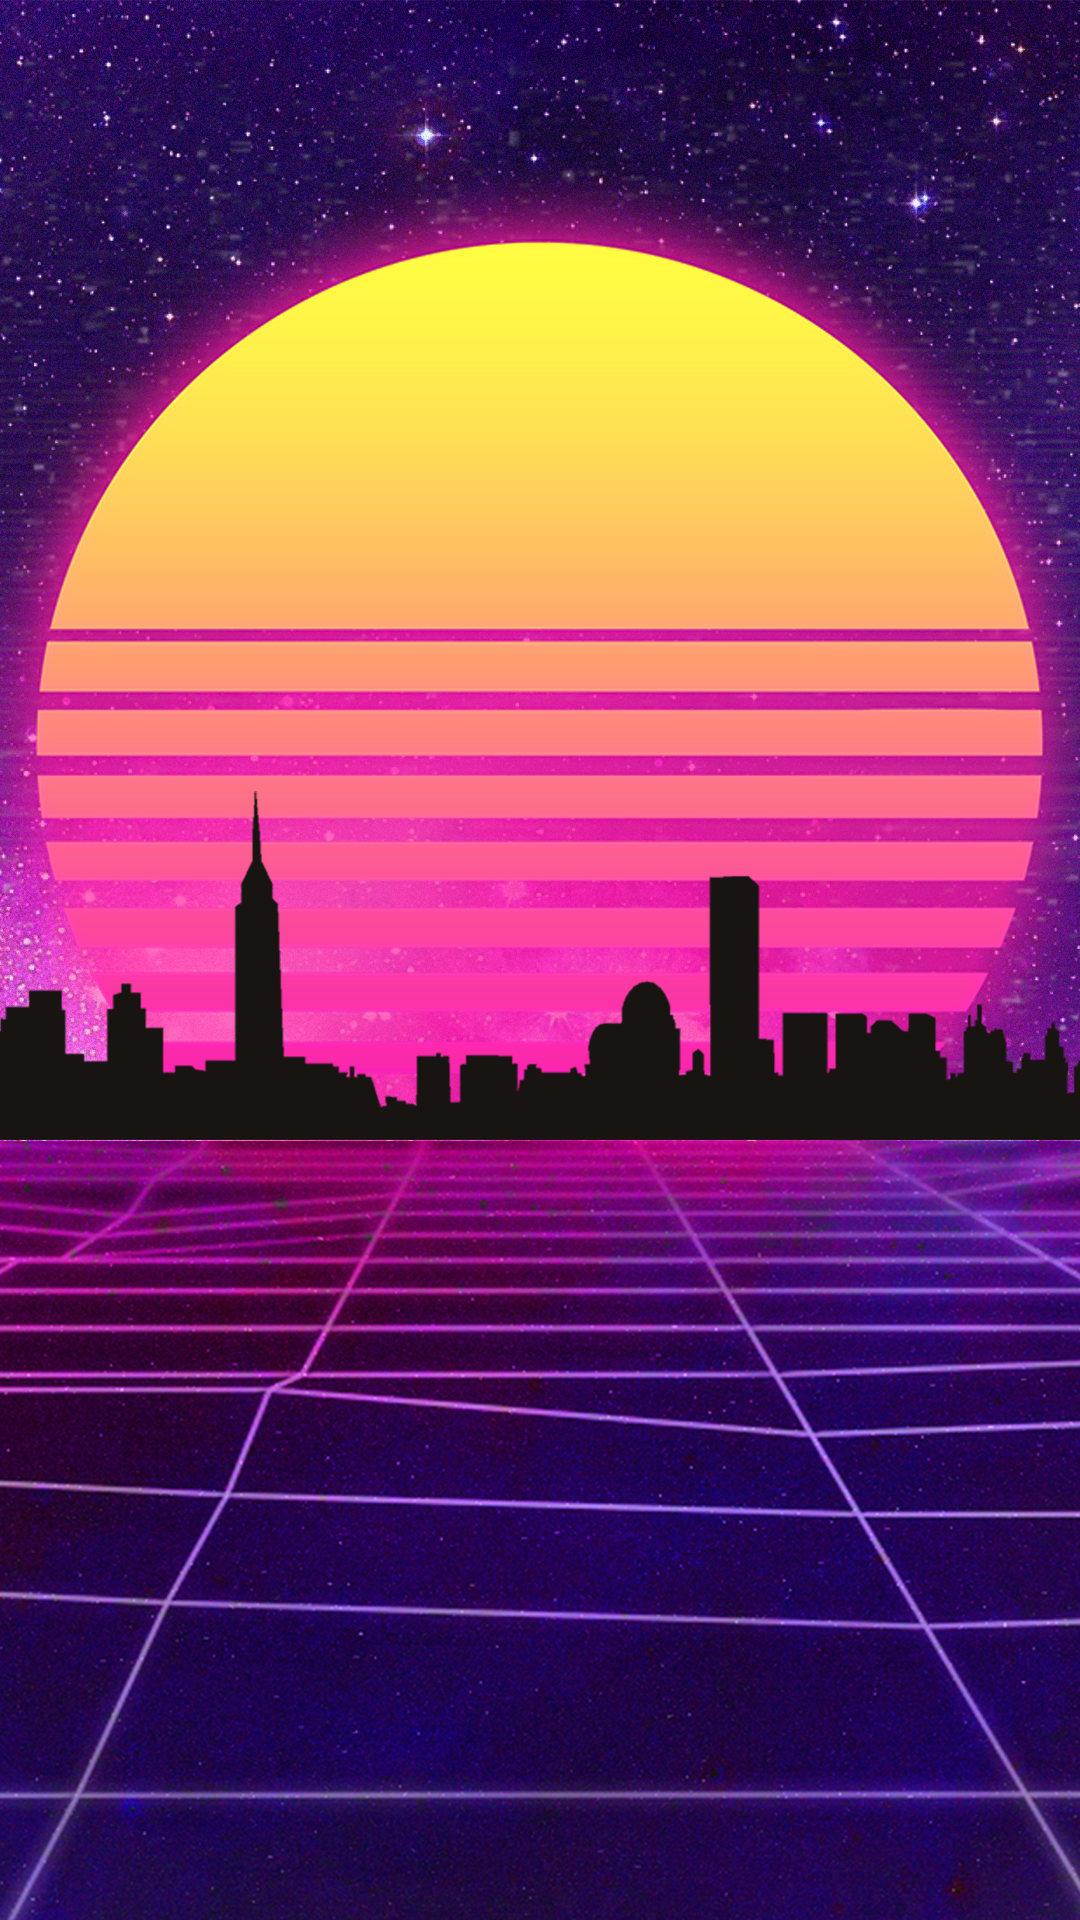 retrowave_wallpaper__mobile__by_halukaliev-dbpr11l.png